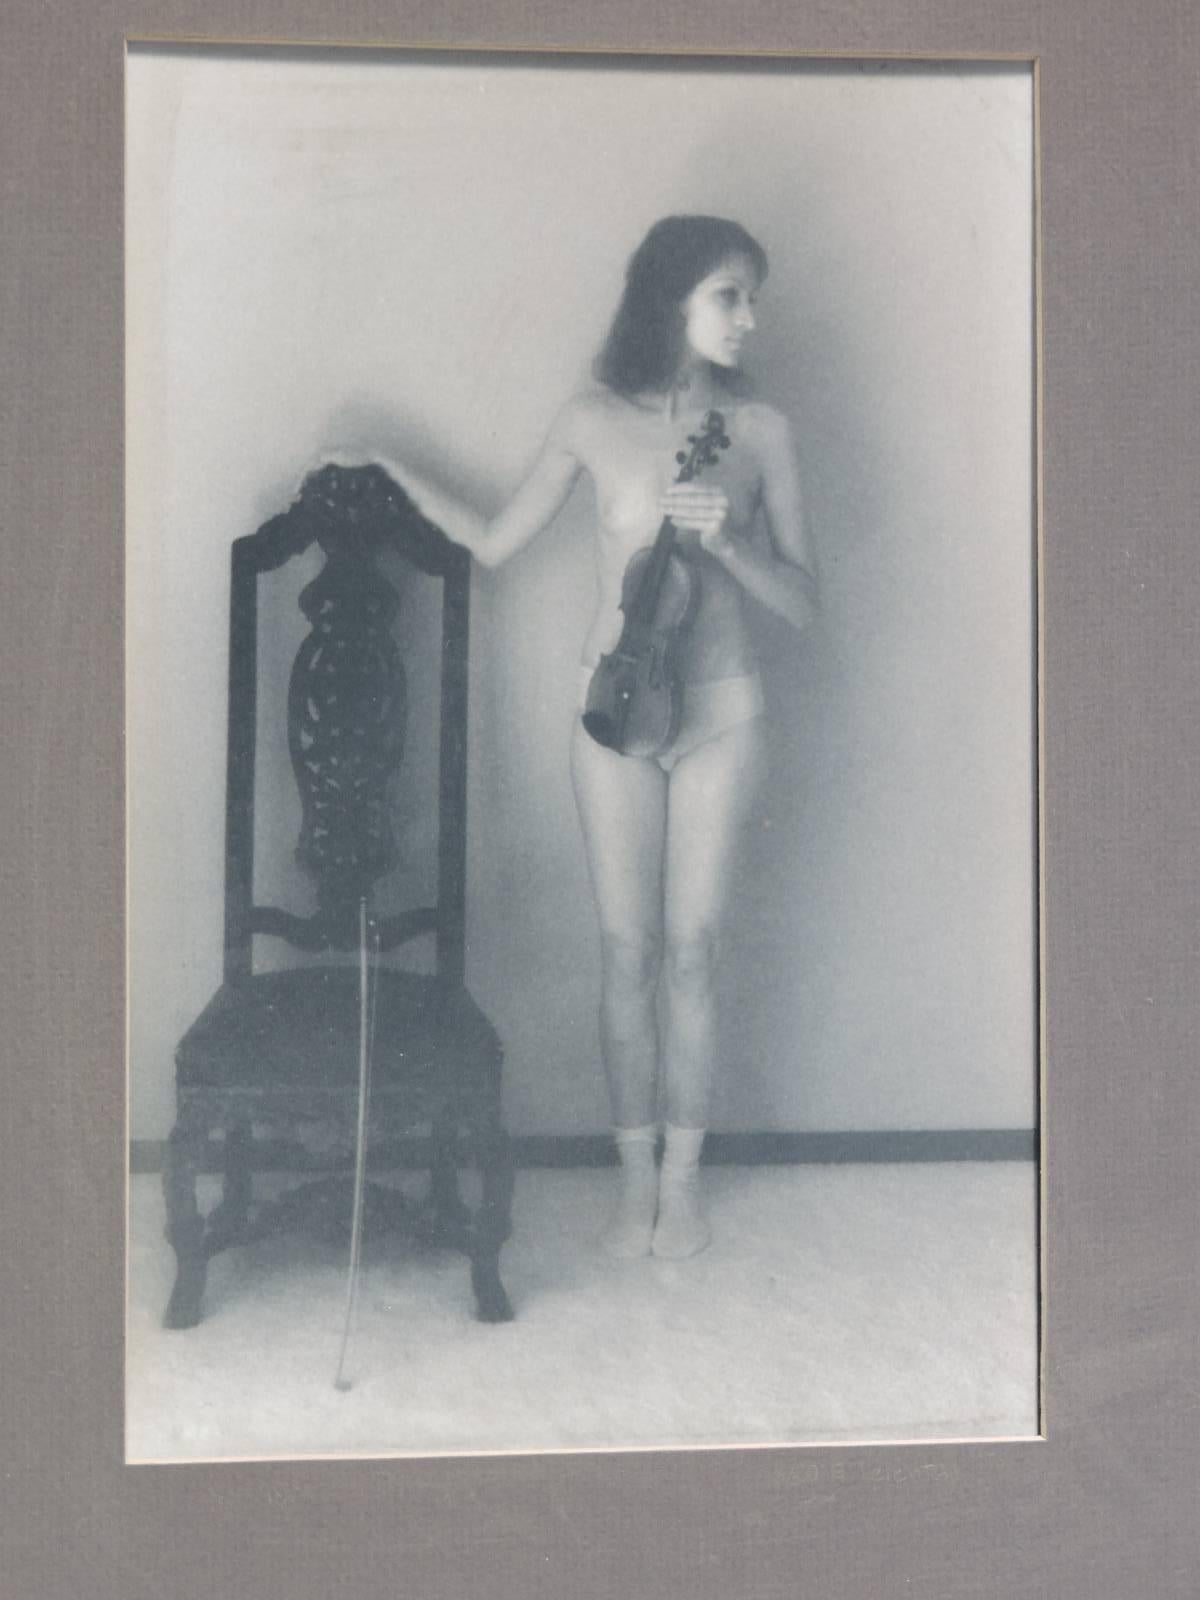 A sensual black and white to slightly sepia tone interior photographic image of a partially nude woman holding a violin, pencil signed dated and numbered by artist on right side of mat below image.
8/20 - E. Lelental, 1974.